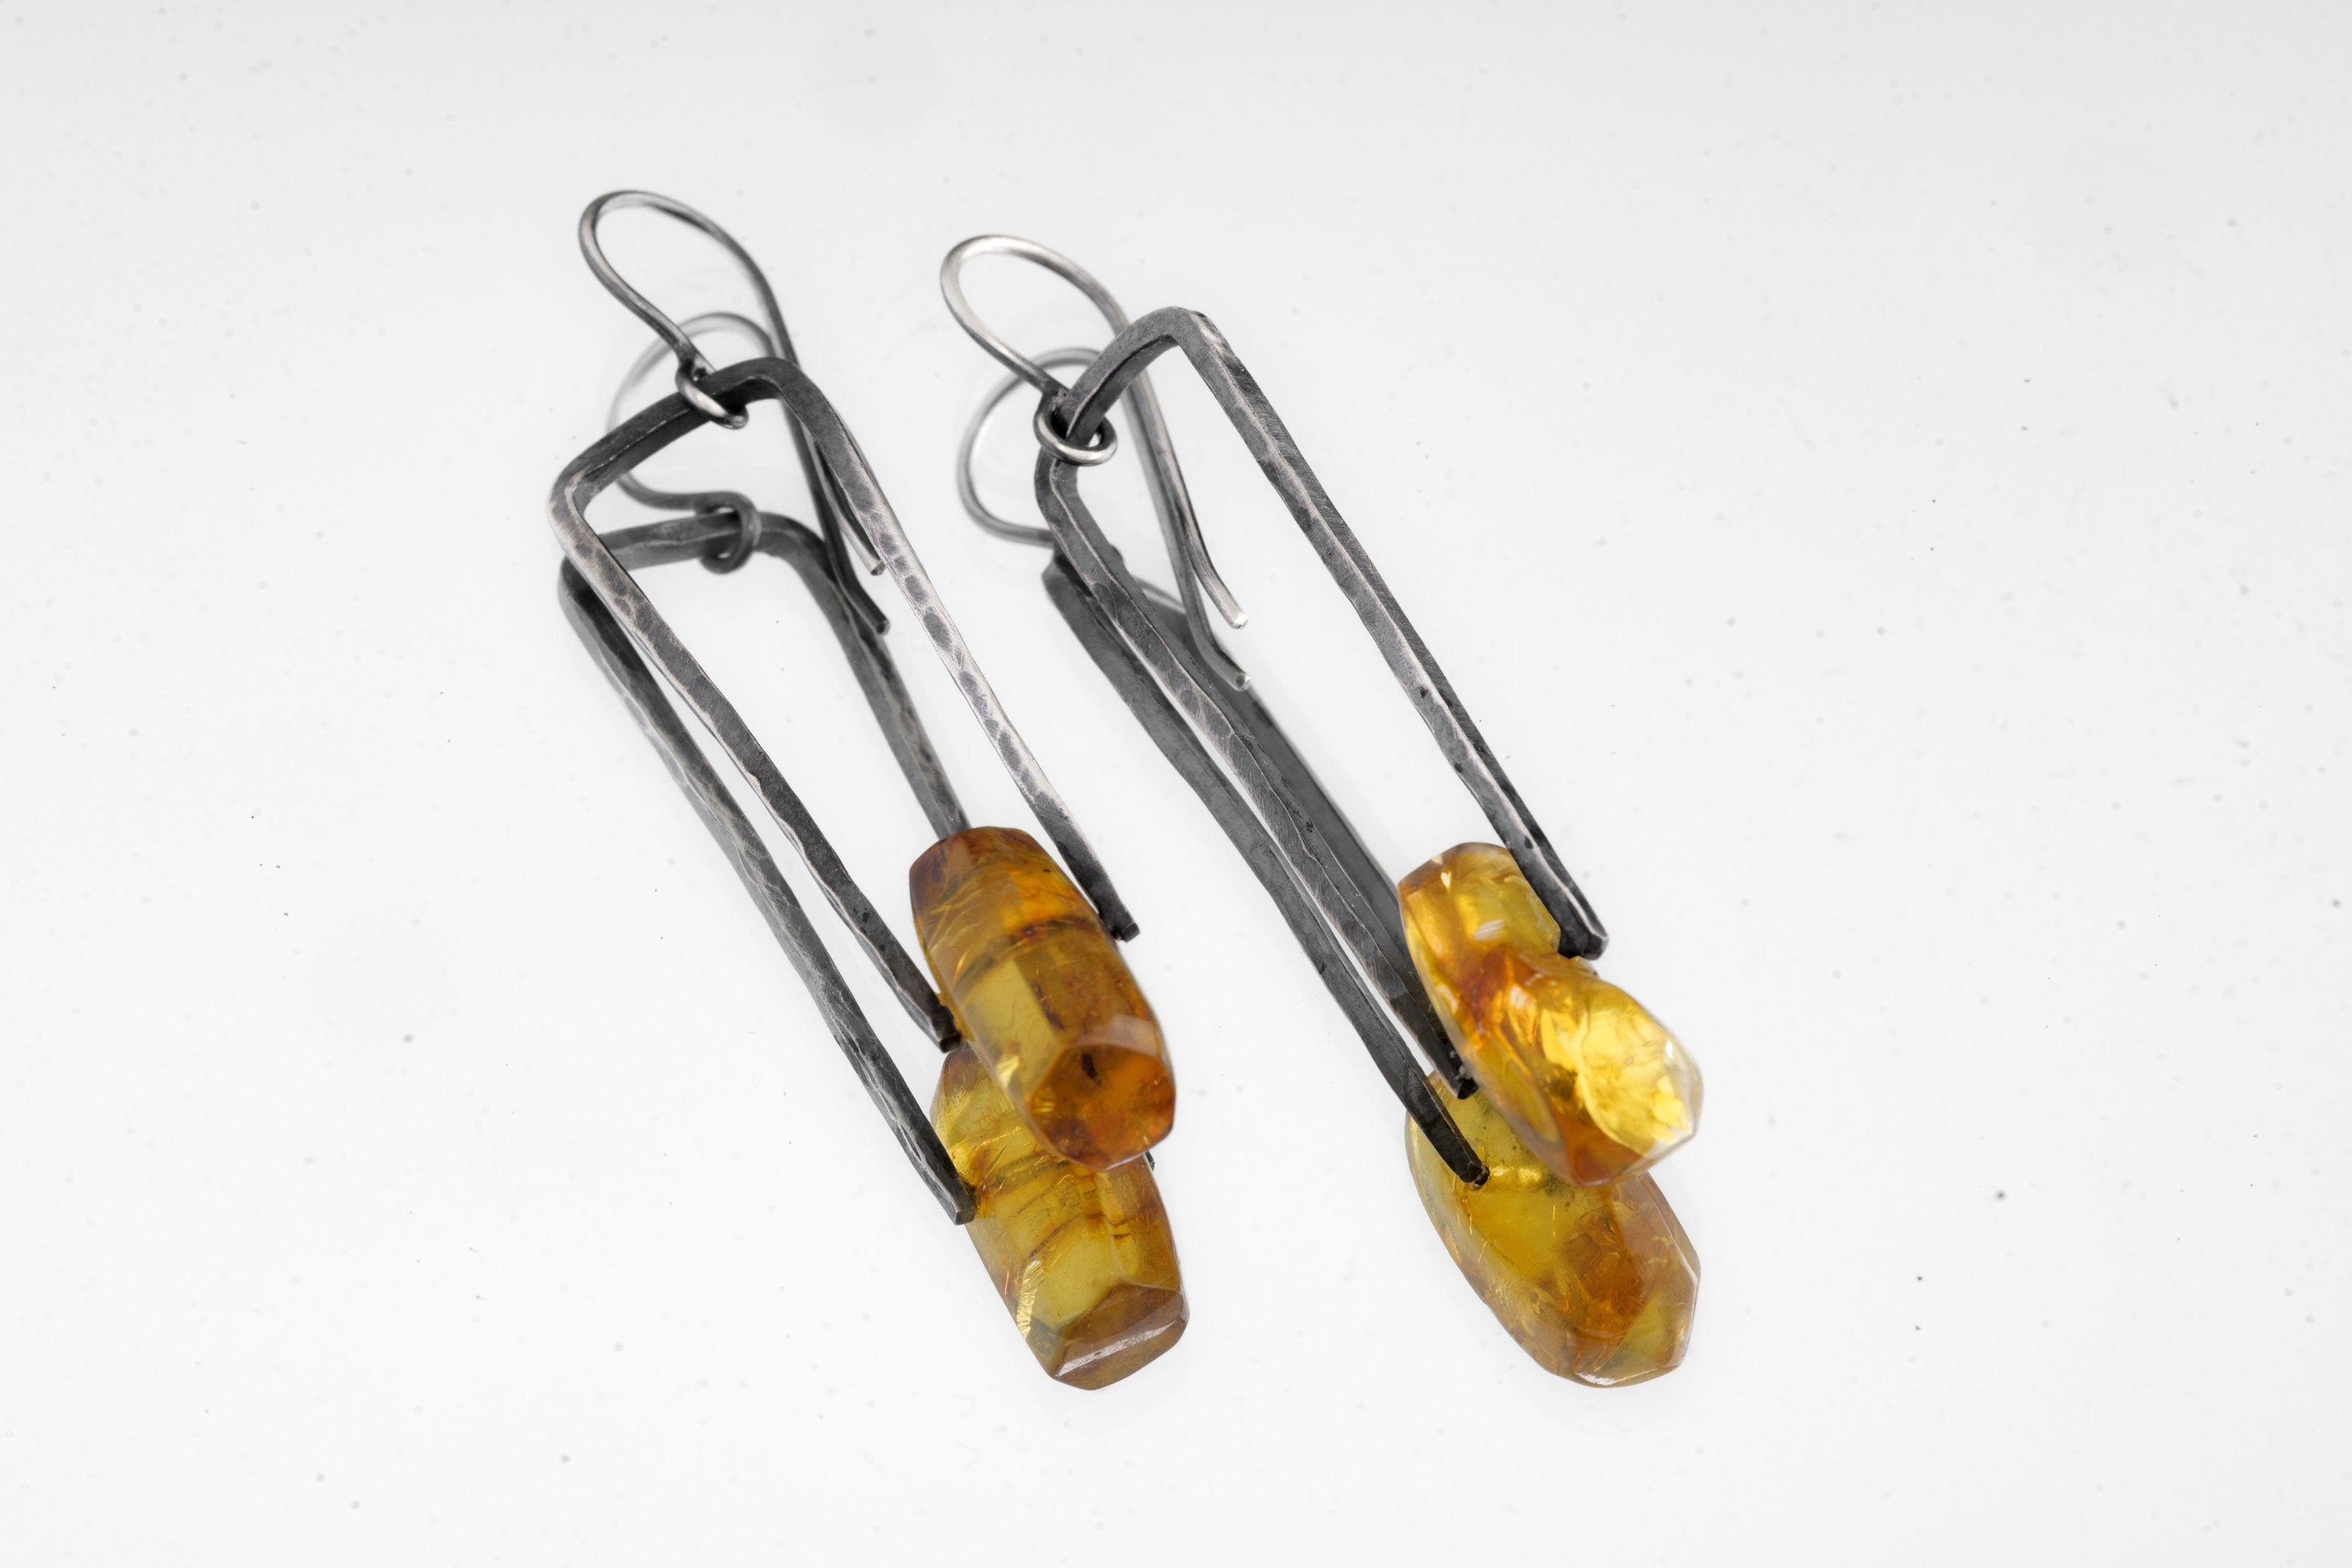 Oxidized Rustic Boho Earrings with Big Mexican Freeform Amber Cabochon Solid 925 Sterling Silver Long Hammered Spinning Dangle Earring Pair